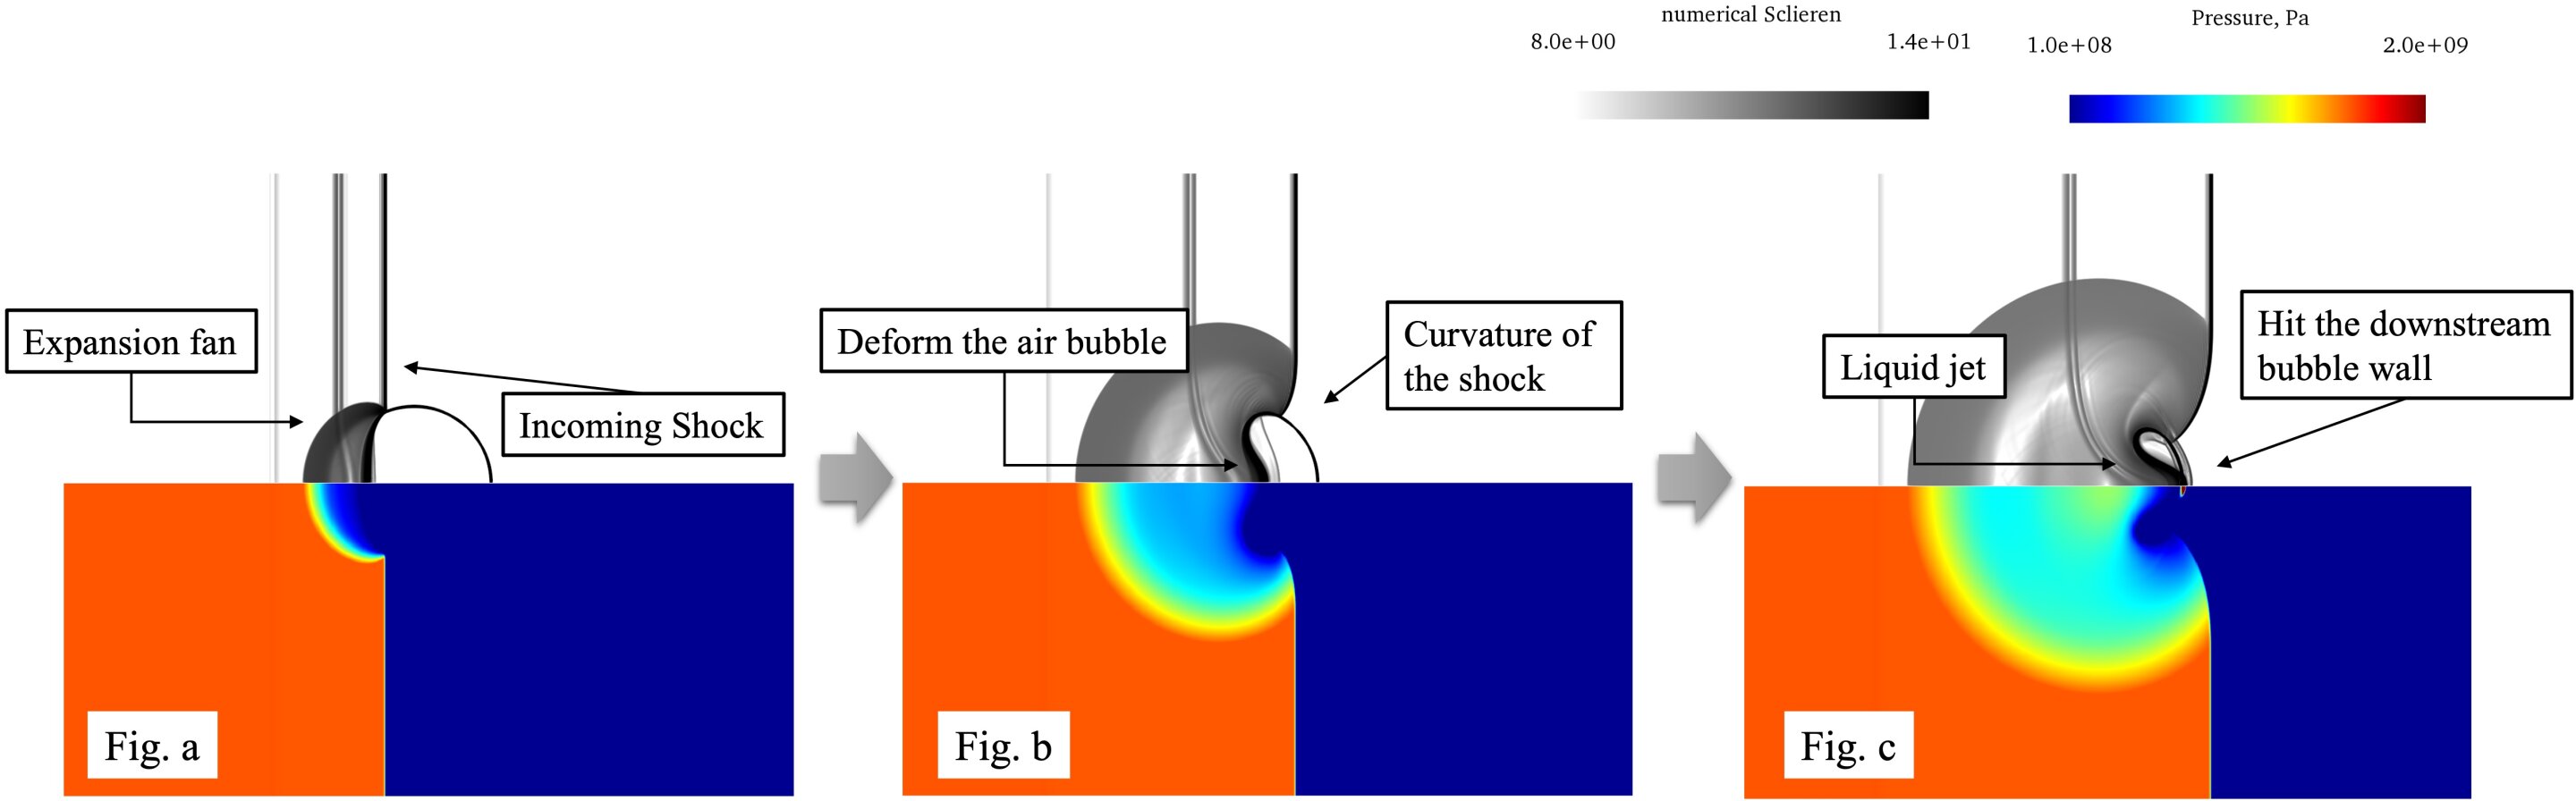 Multiphase flow simulation modeling: steady state vs transient